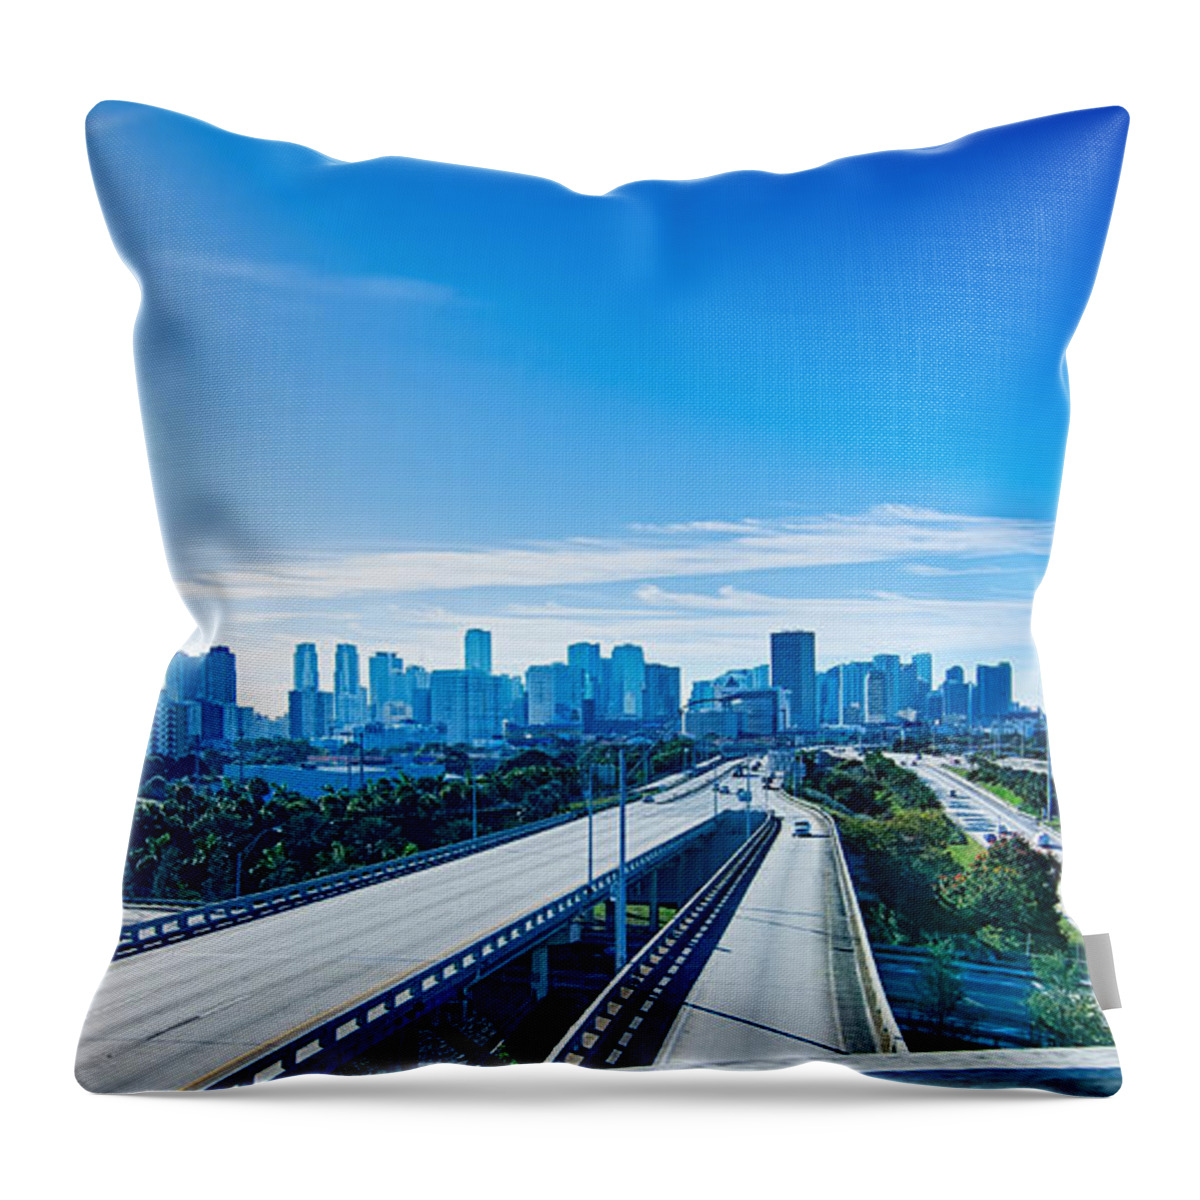 Miami Throw Pillow featuring the photograph Miami Florida City Skyline And Streets #2 by Alex Grichenko